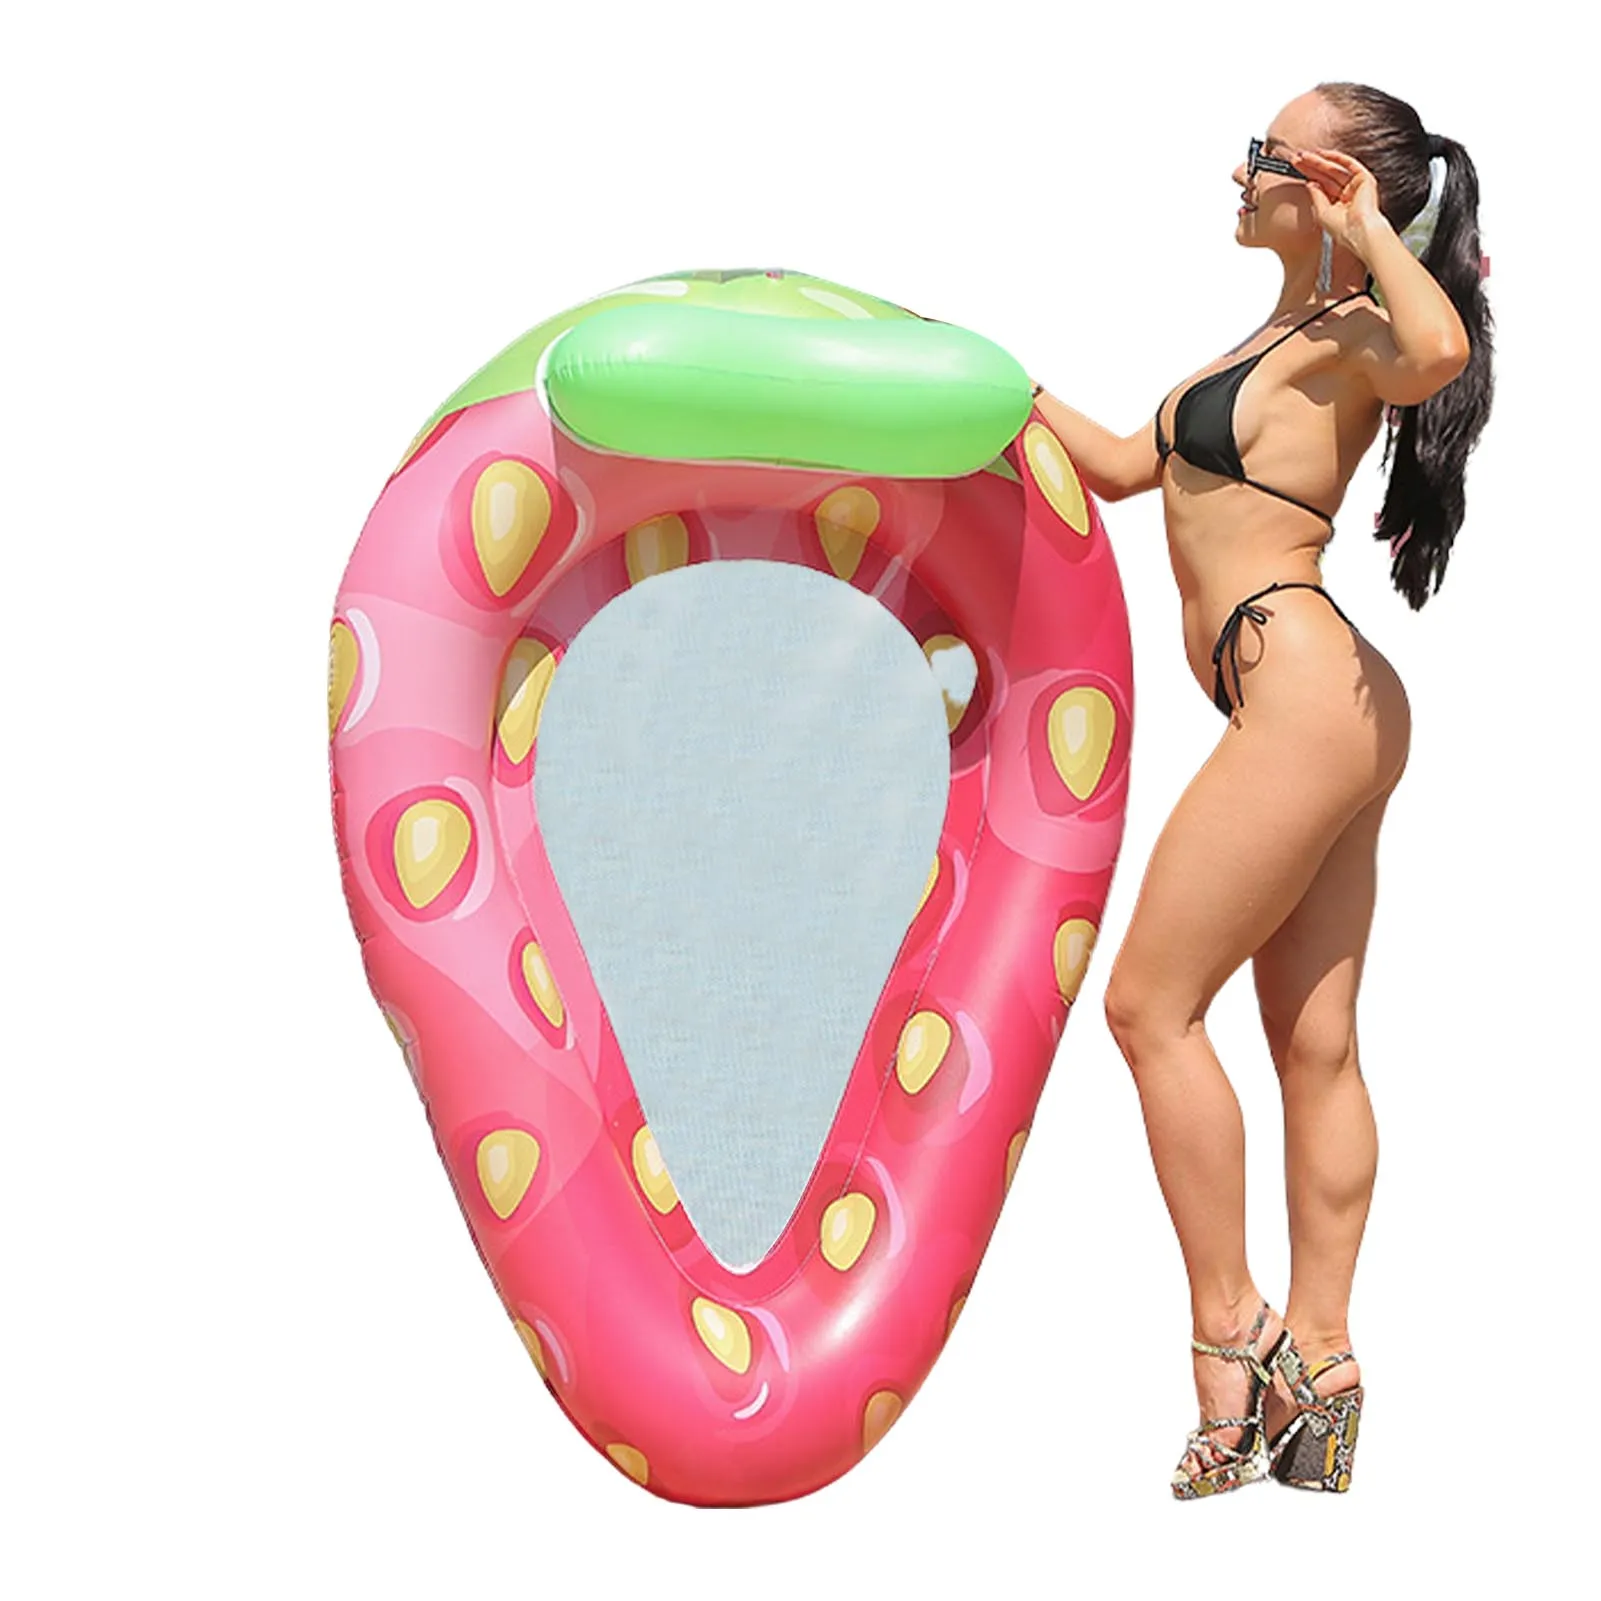 

Strawberry Pool Float Jumbo Fruit Inflatable Lounger Inflatable Relaxing Water Hammock Floatie For Swimming Pool Tanning Lounge